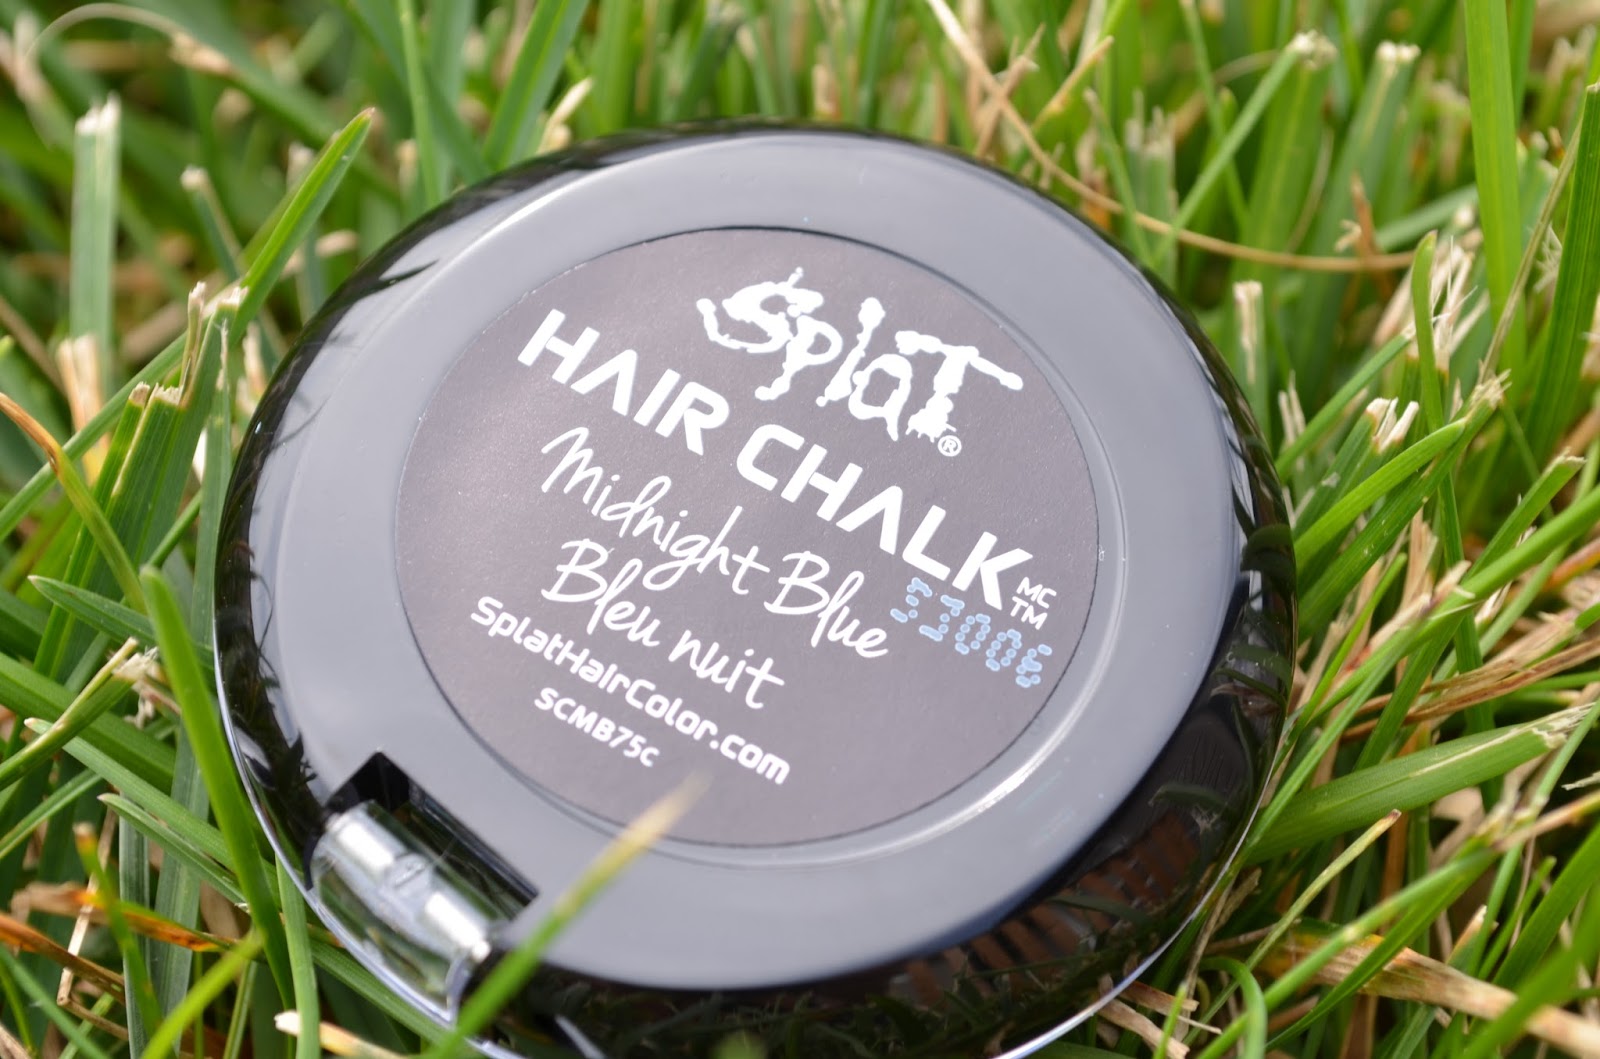 2. Splat Hair Chalk Midnight Blue Review: Does It Work? - wide 9